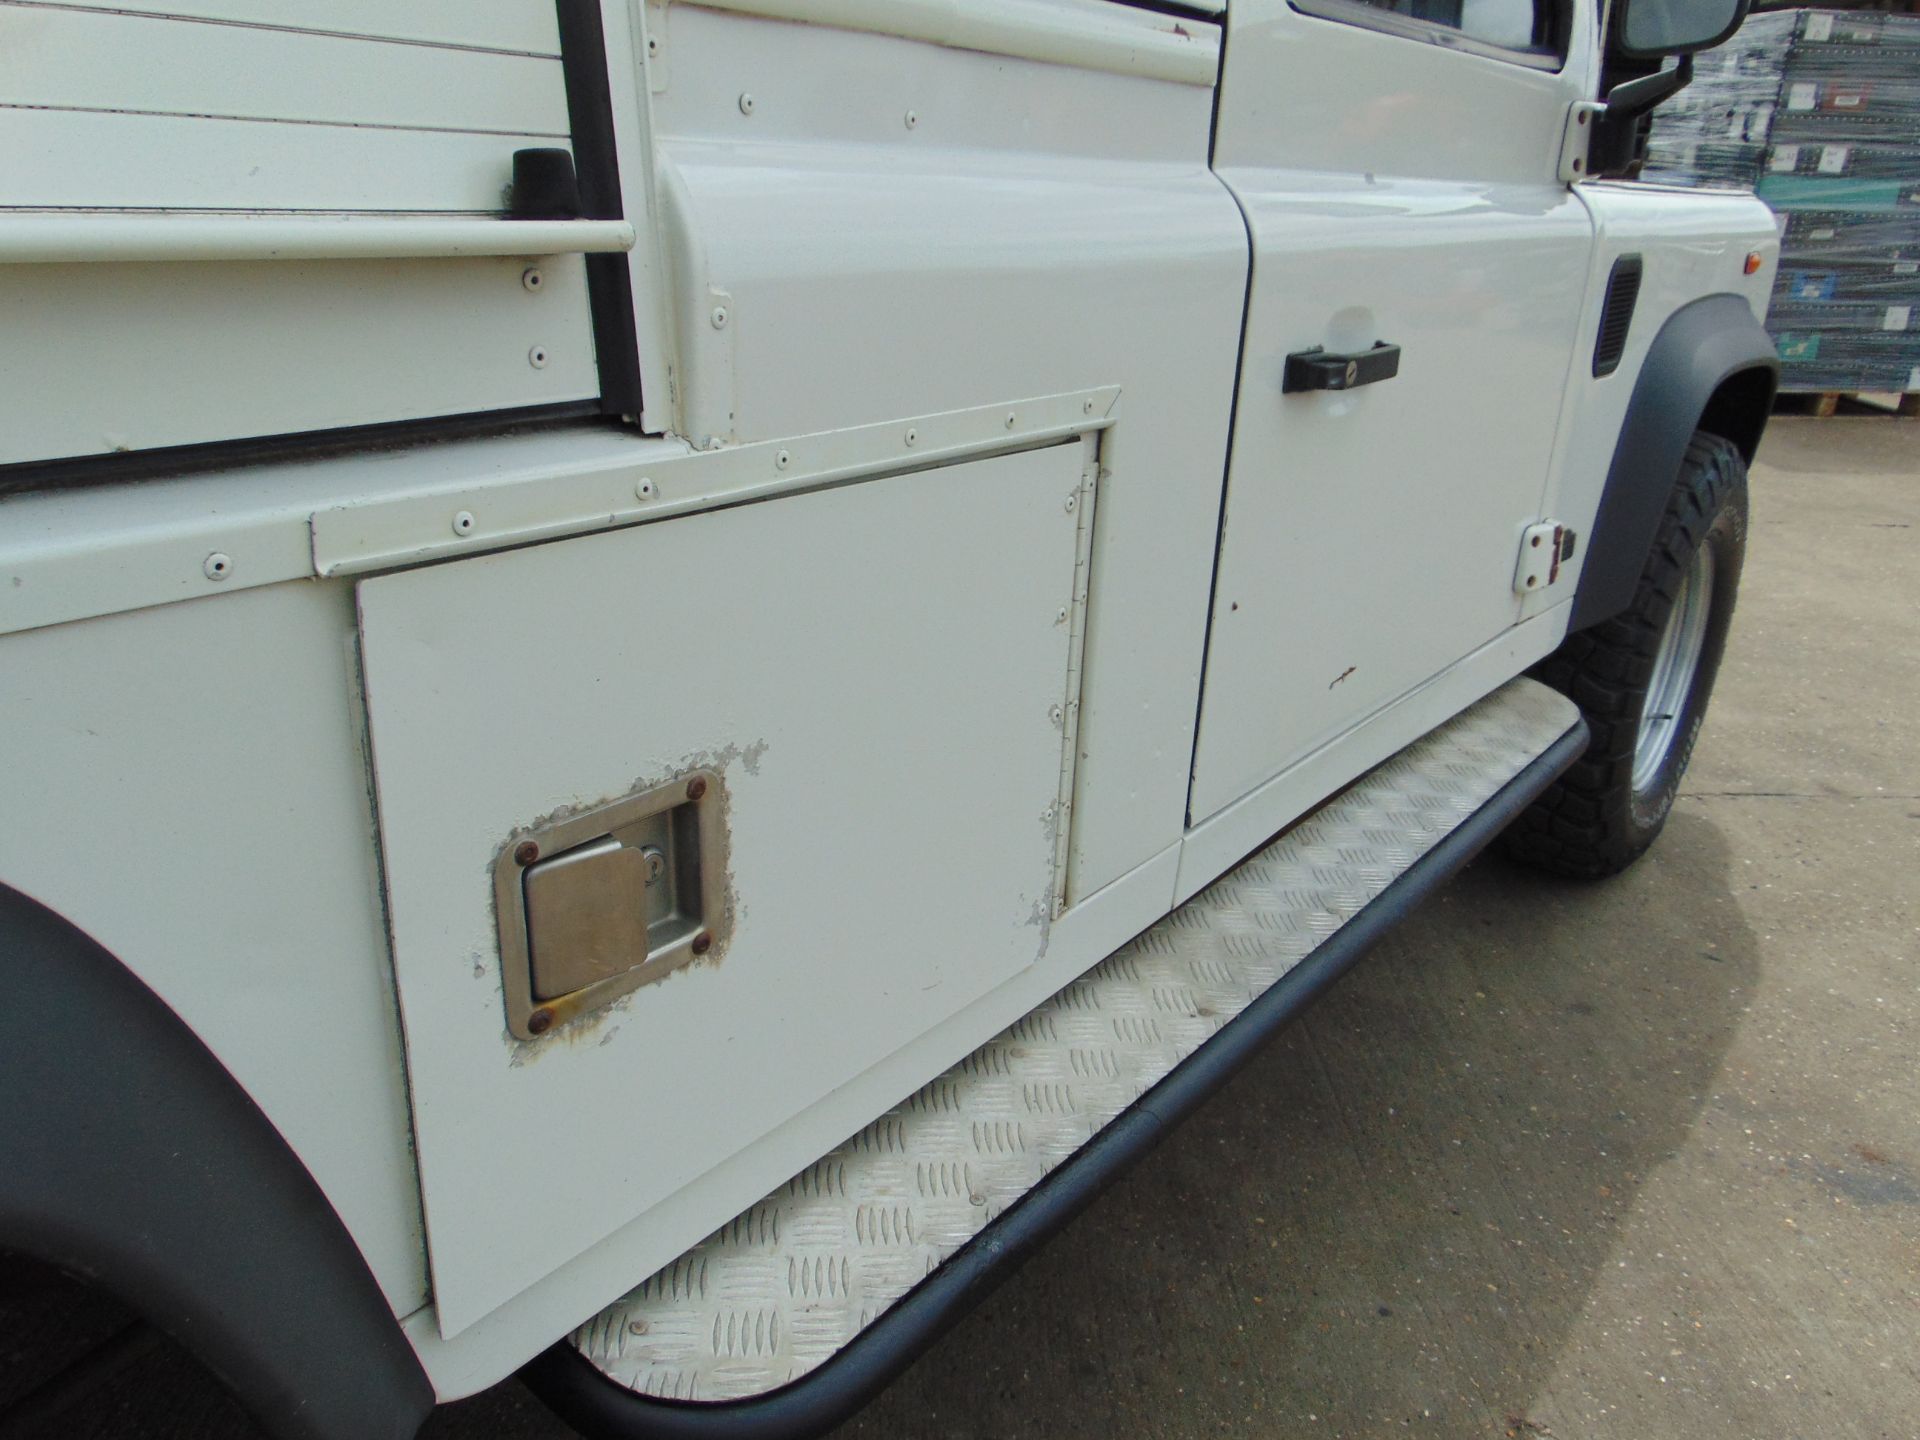 2007 Land Rover Defender 110 Puma hardtop 4x4 Utility vehicle (mobile workshop) with hydraulic winch - Image 15 of 31